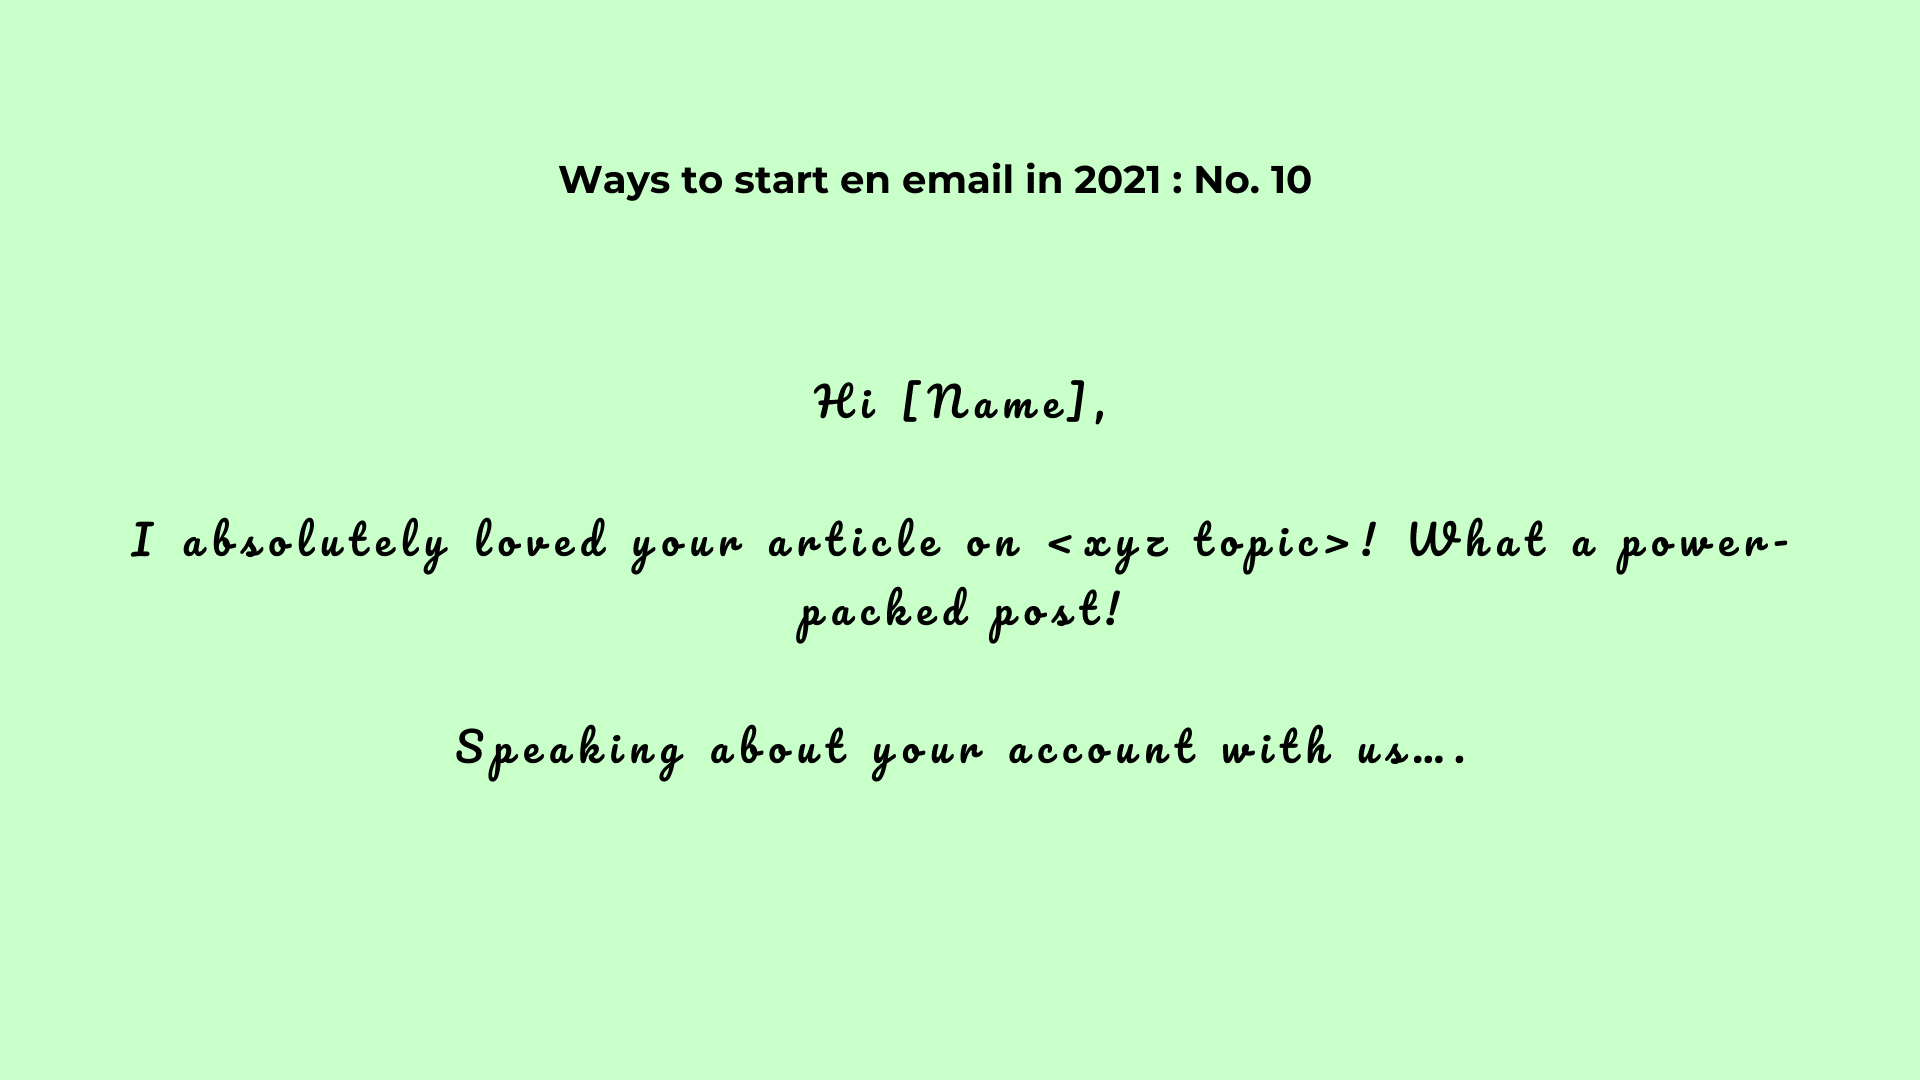 19-ways-to-start-an email-way10